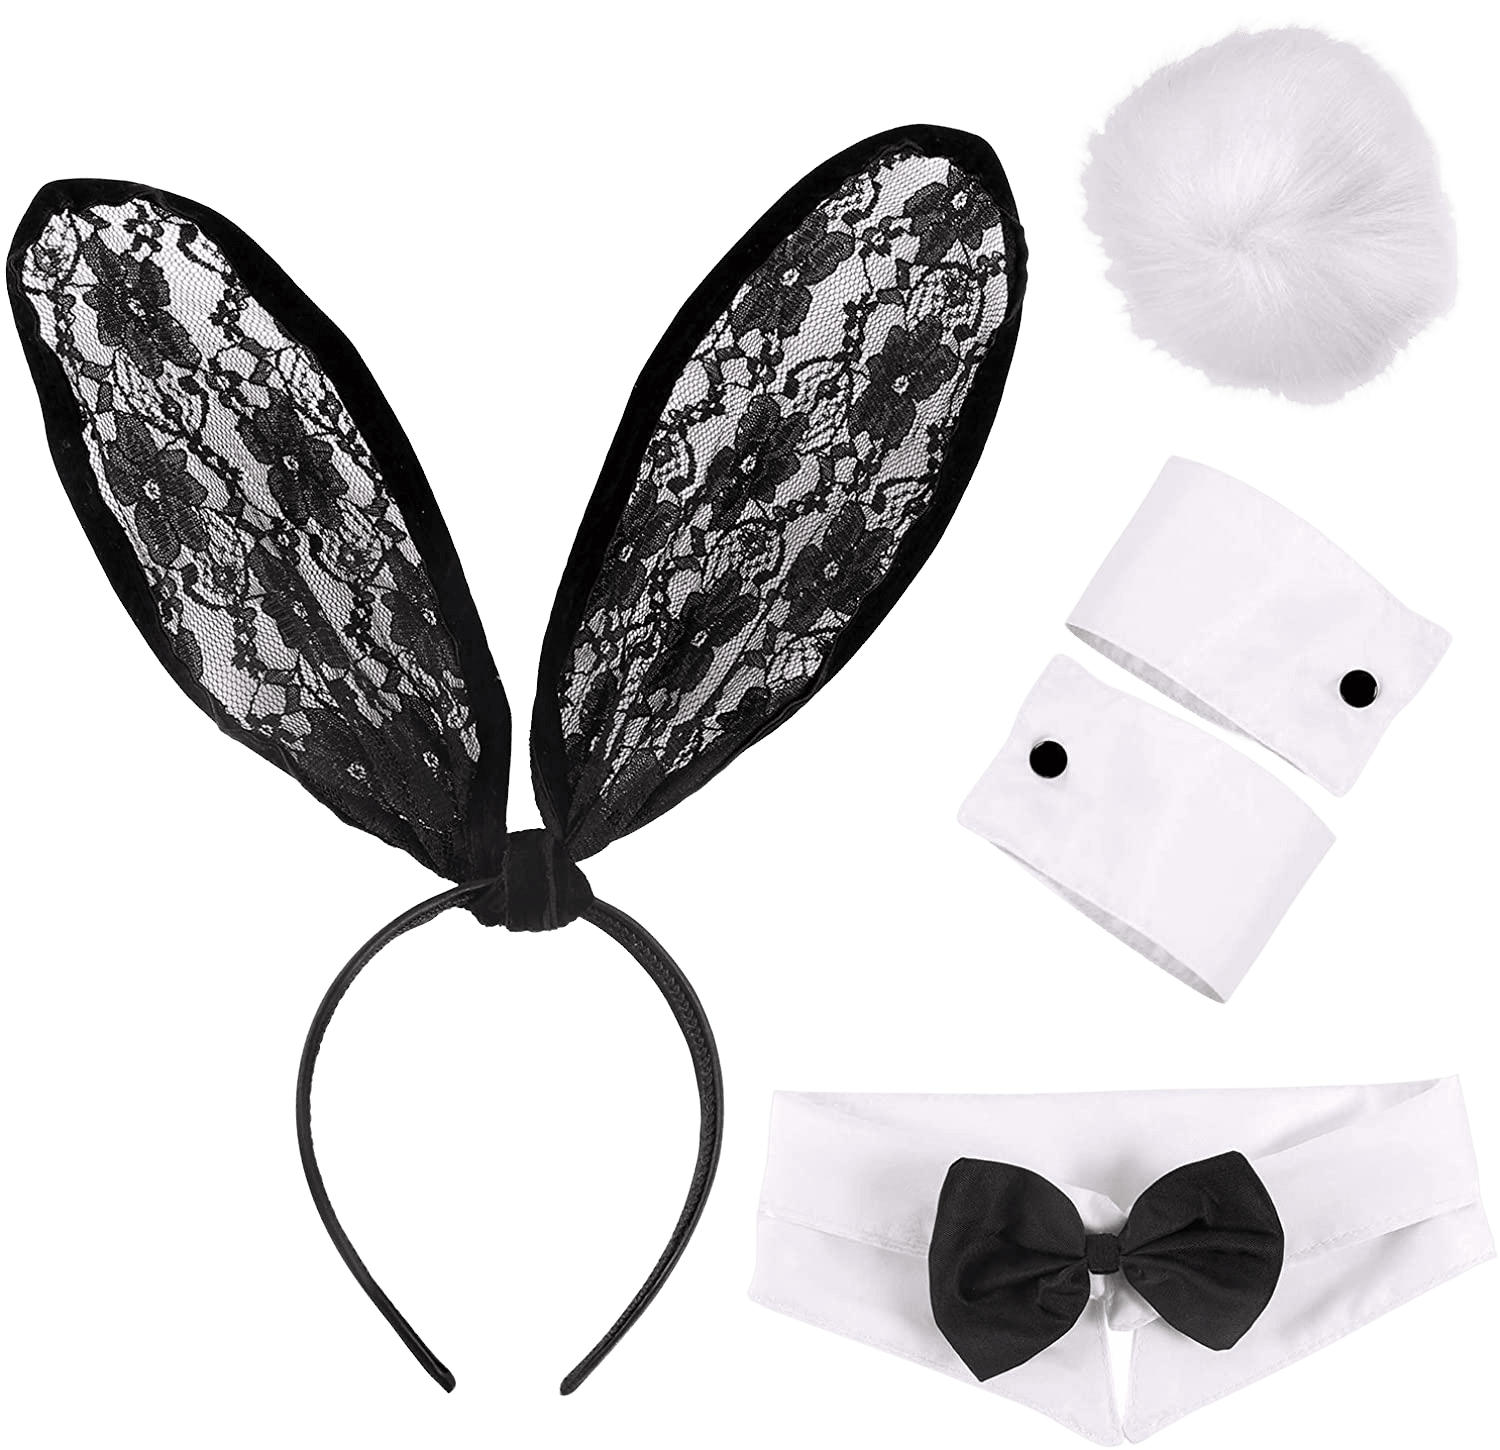 Bunny Costume Accessories Black White Rabbit Ears Collar Cuffs Tail Halloween Sexy Bunny Cosplay Set for Women | Decor Gifts and More